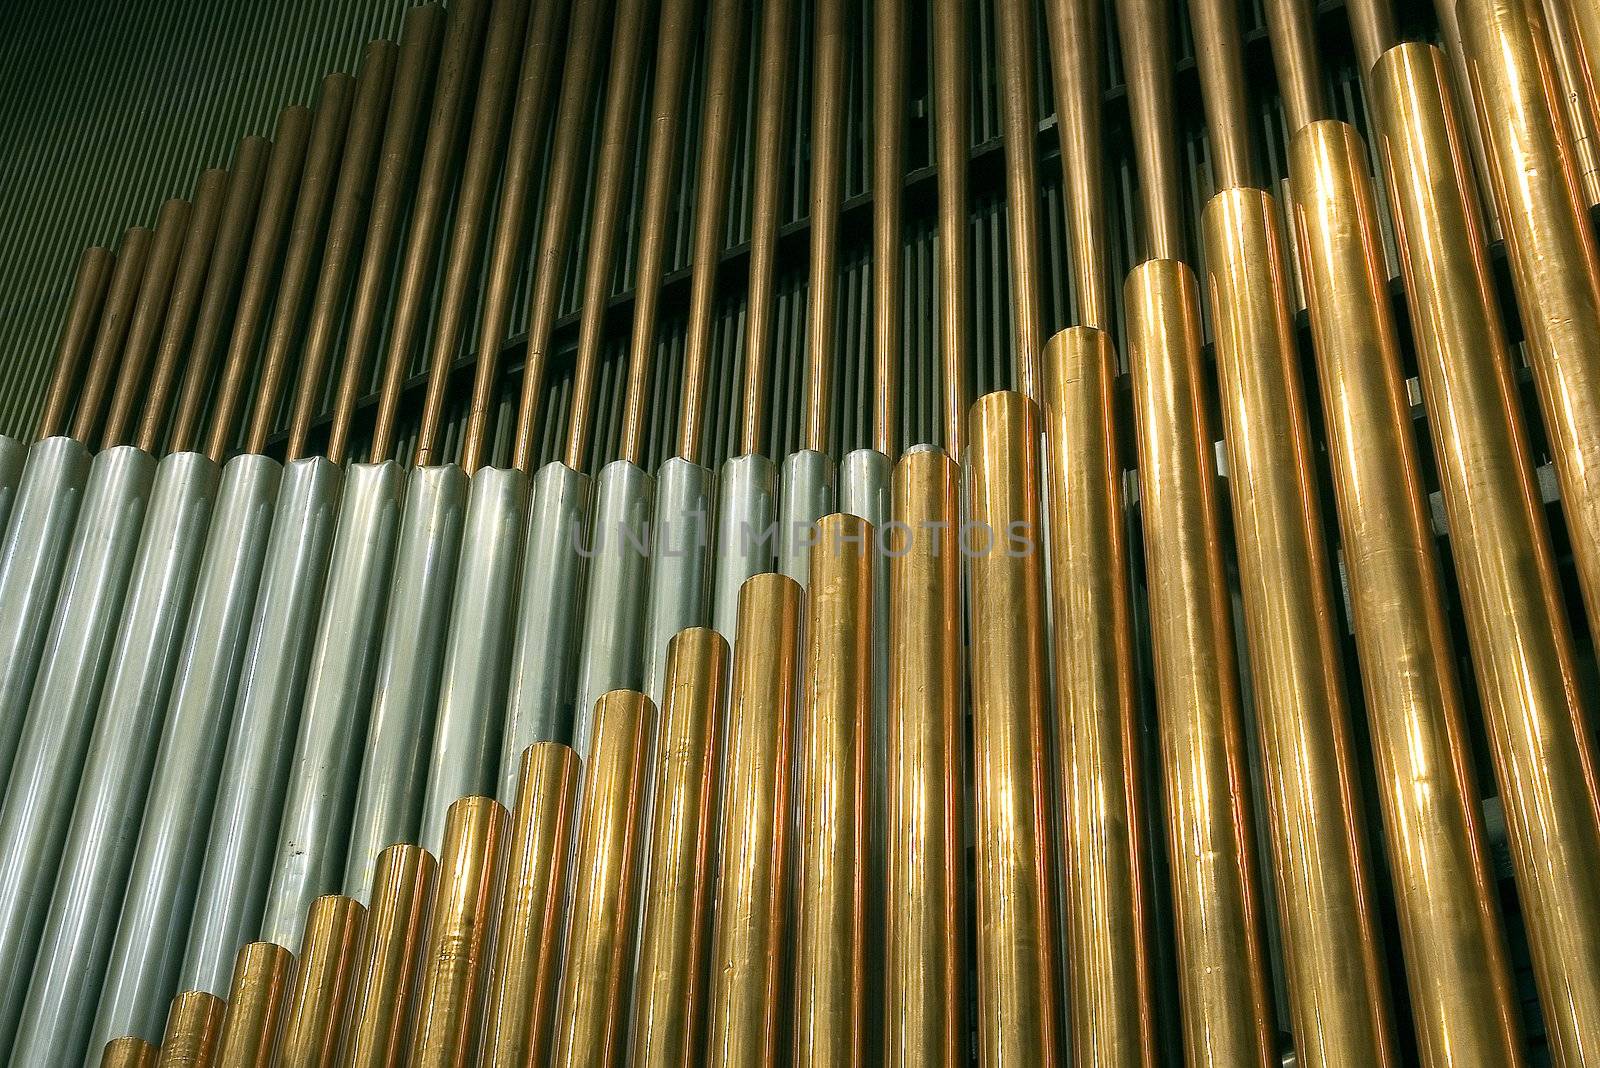 Traditional organ pipes. Music from this tool as a magic